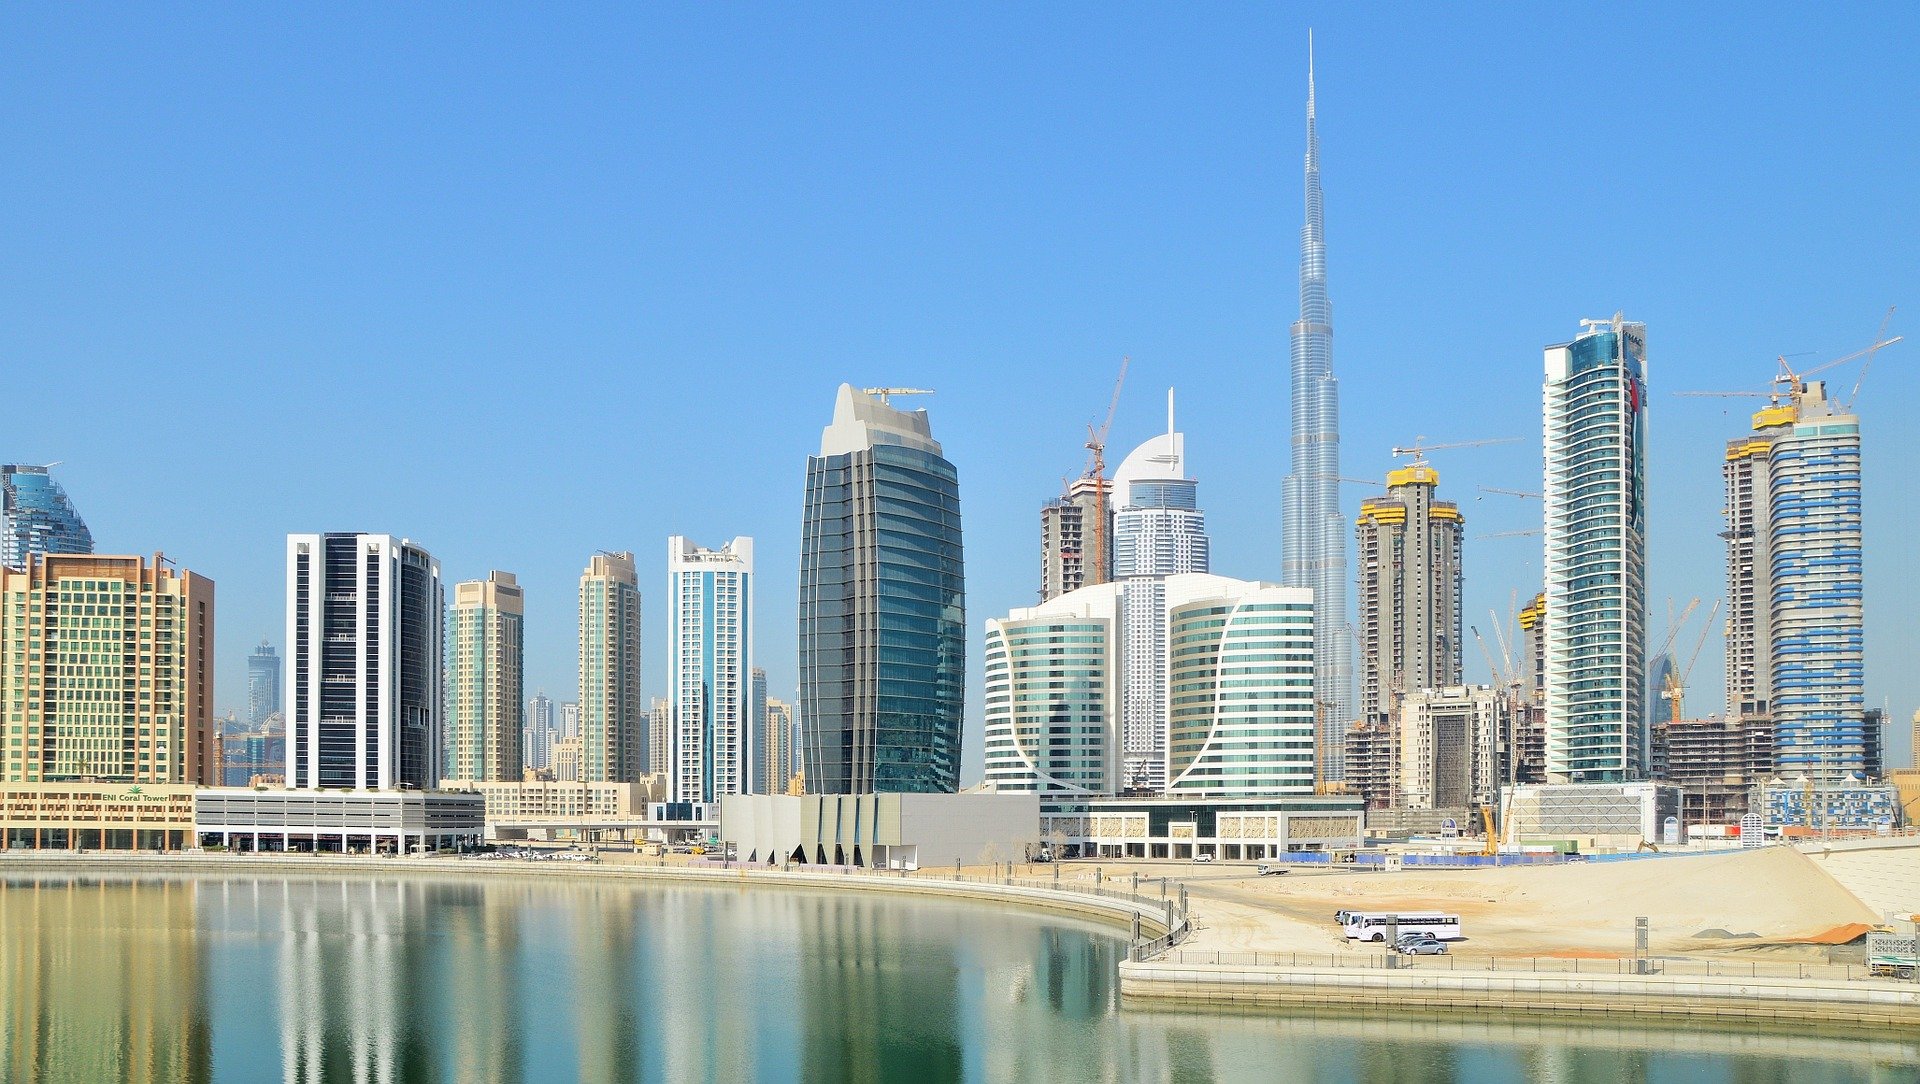 The architecture and modernity are one of the main attractions for people looking to study and live in Dubai.